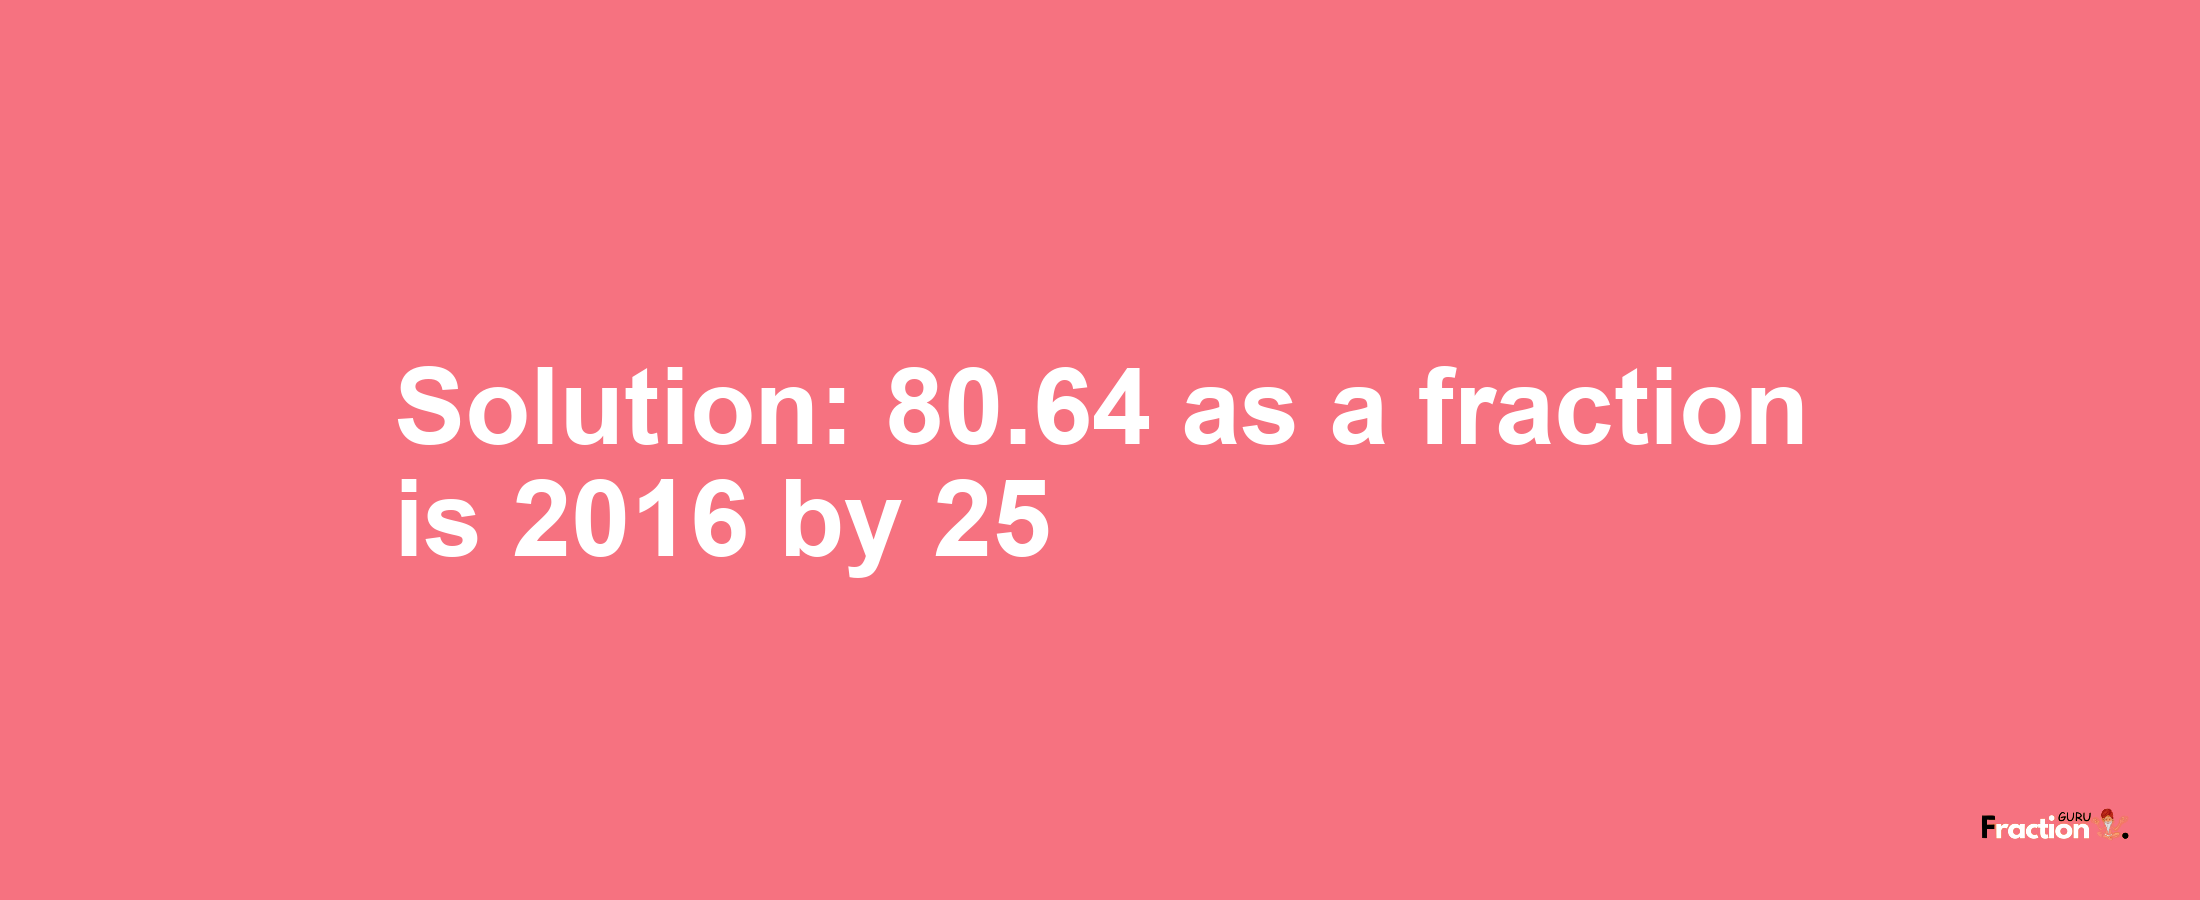 Solution:80.64 as a fraction is 2016/25